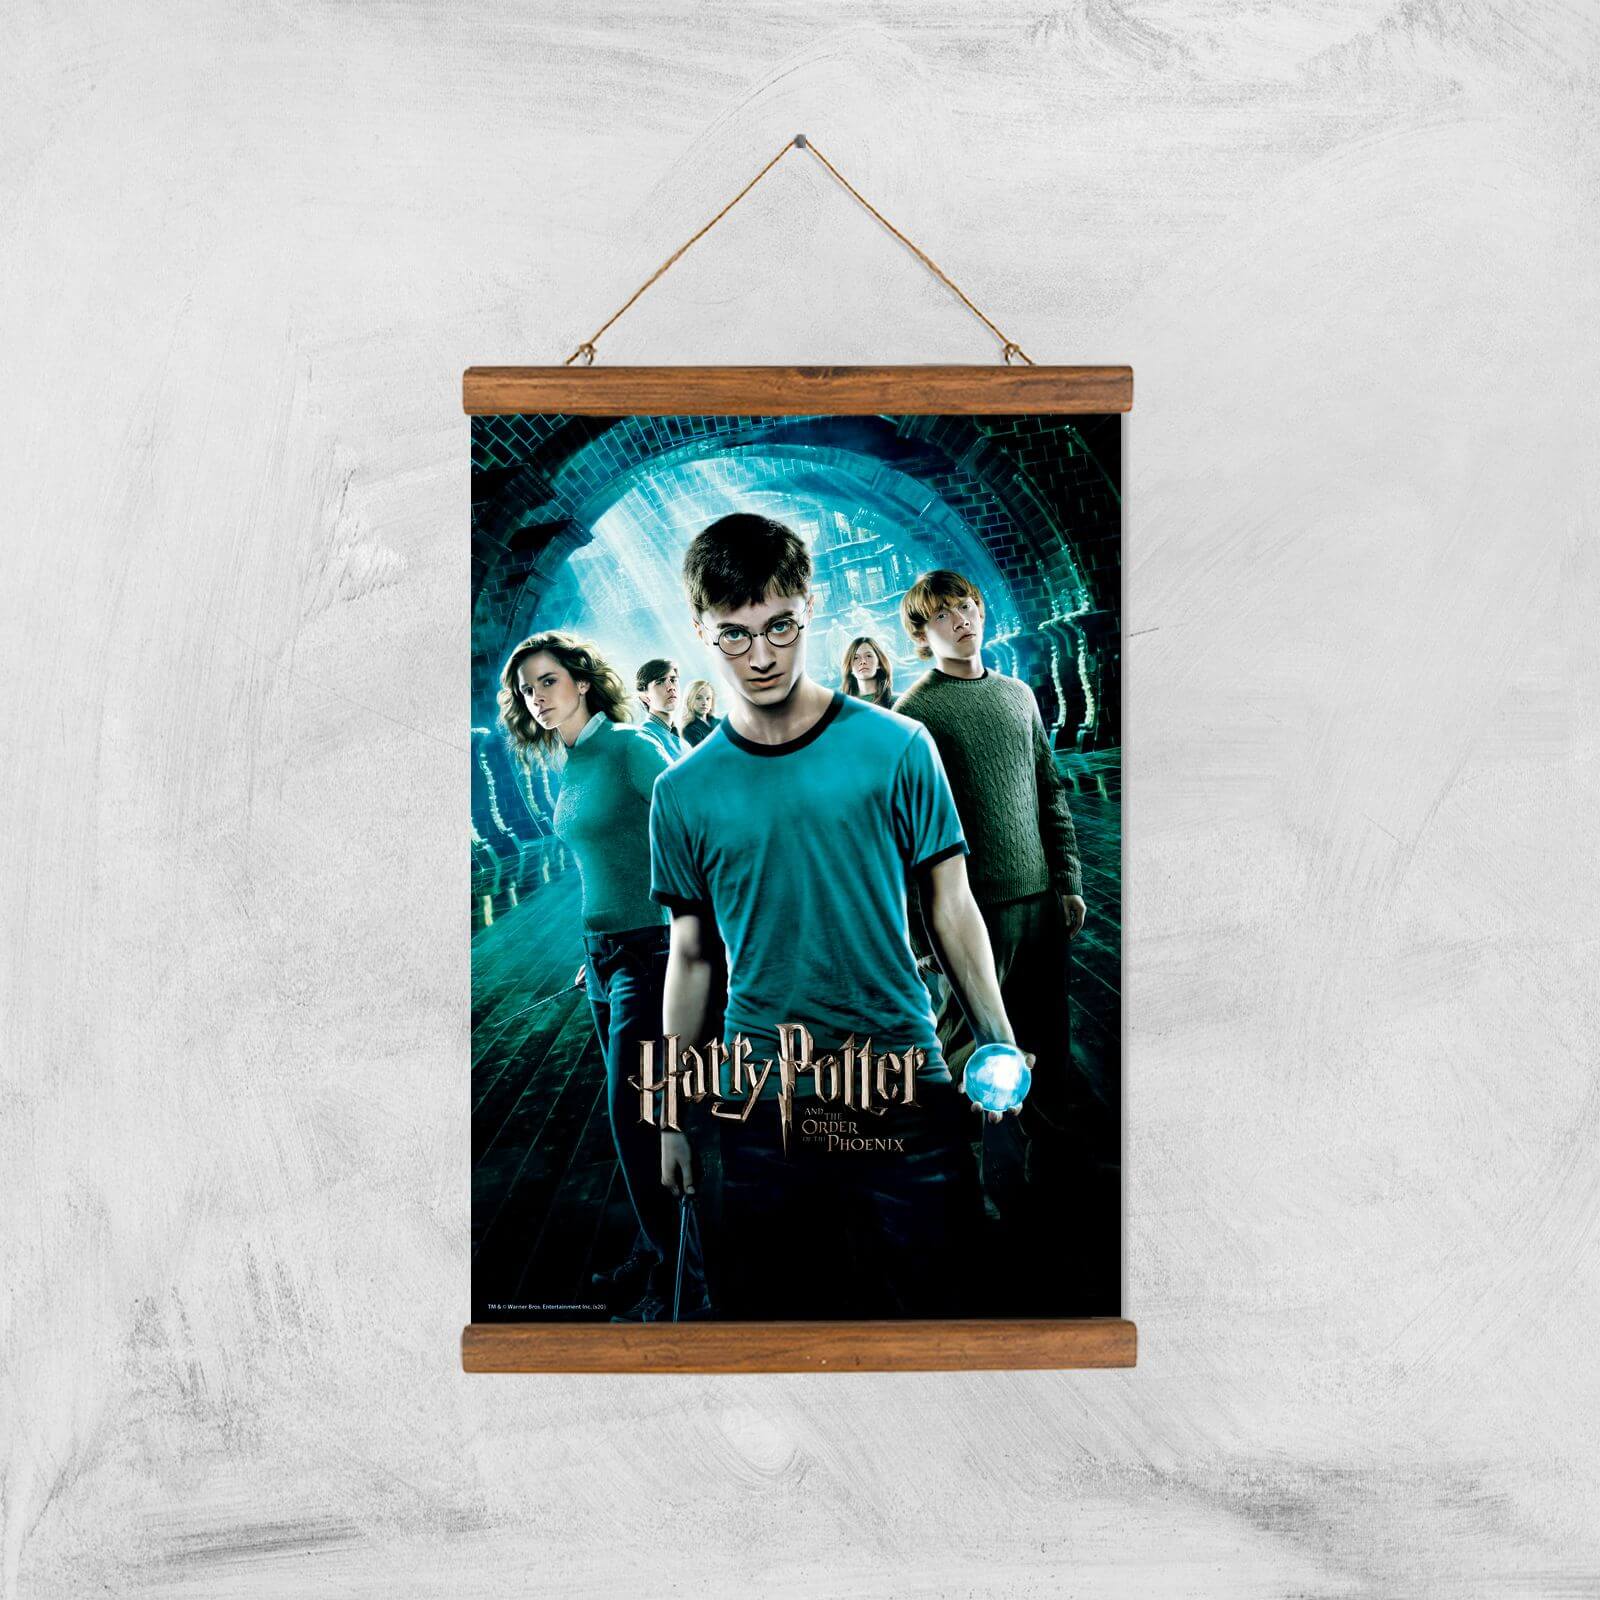 Harry Potter and the Order Of The Phoenix Giclee Art Print - A3 - Wooden Hanger